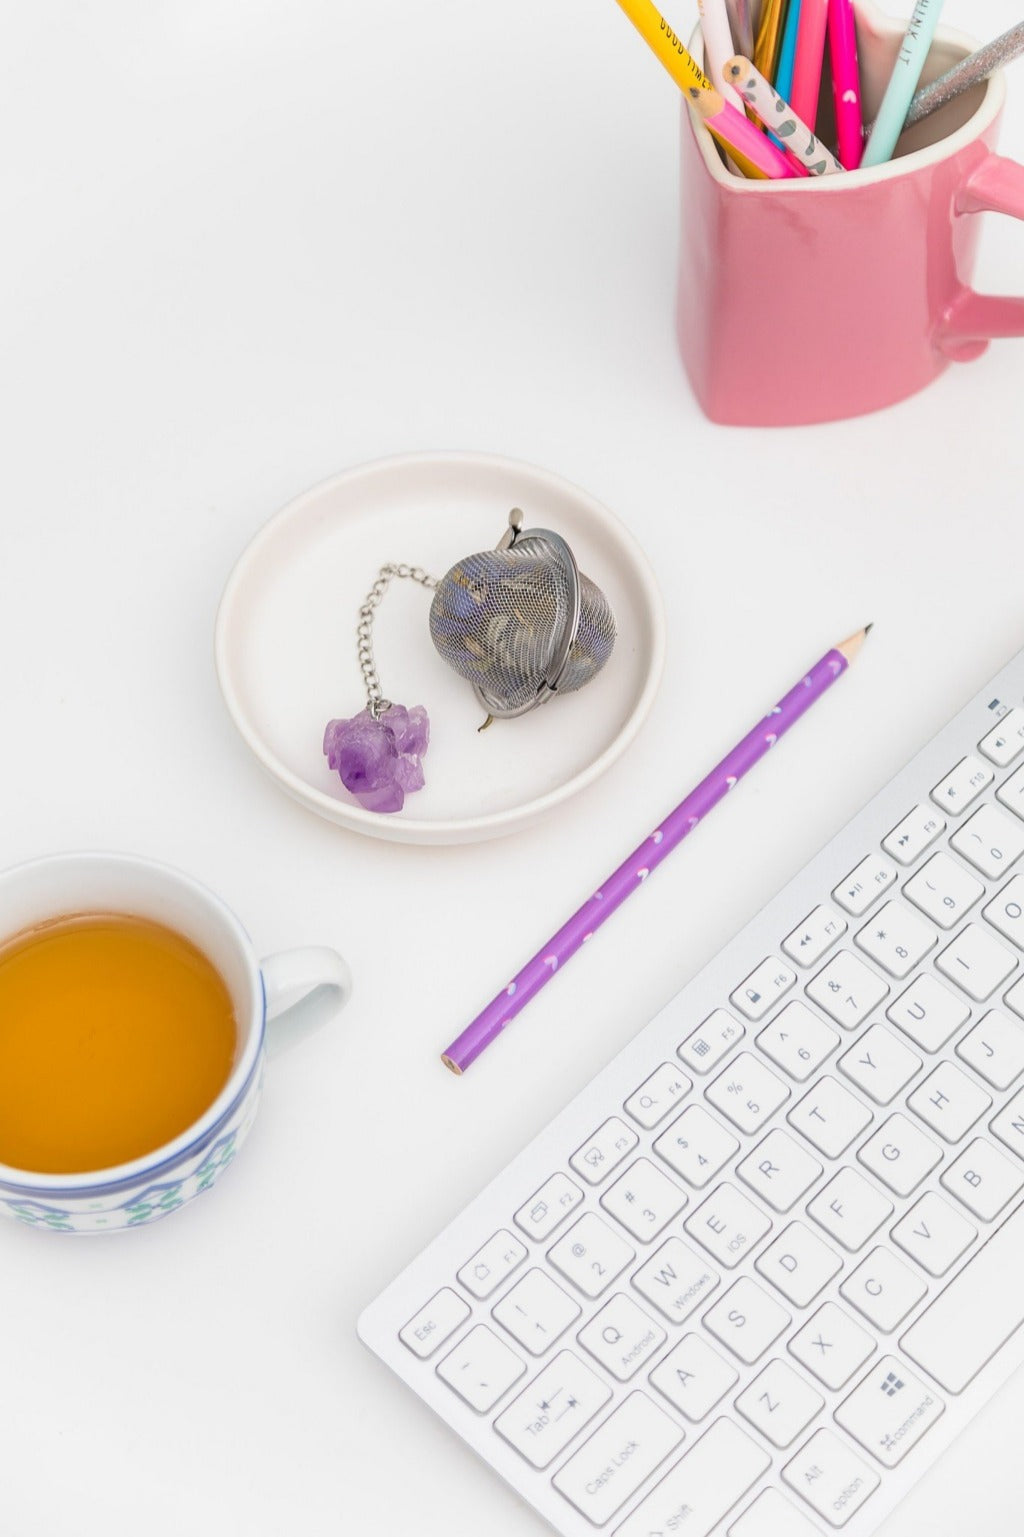 stainless tea strainer with Amethyst stone for dried flower tea and tea leaves displayed on office table with keyboard, teacup, and pencil holder